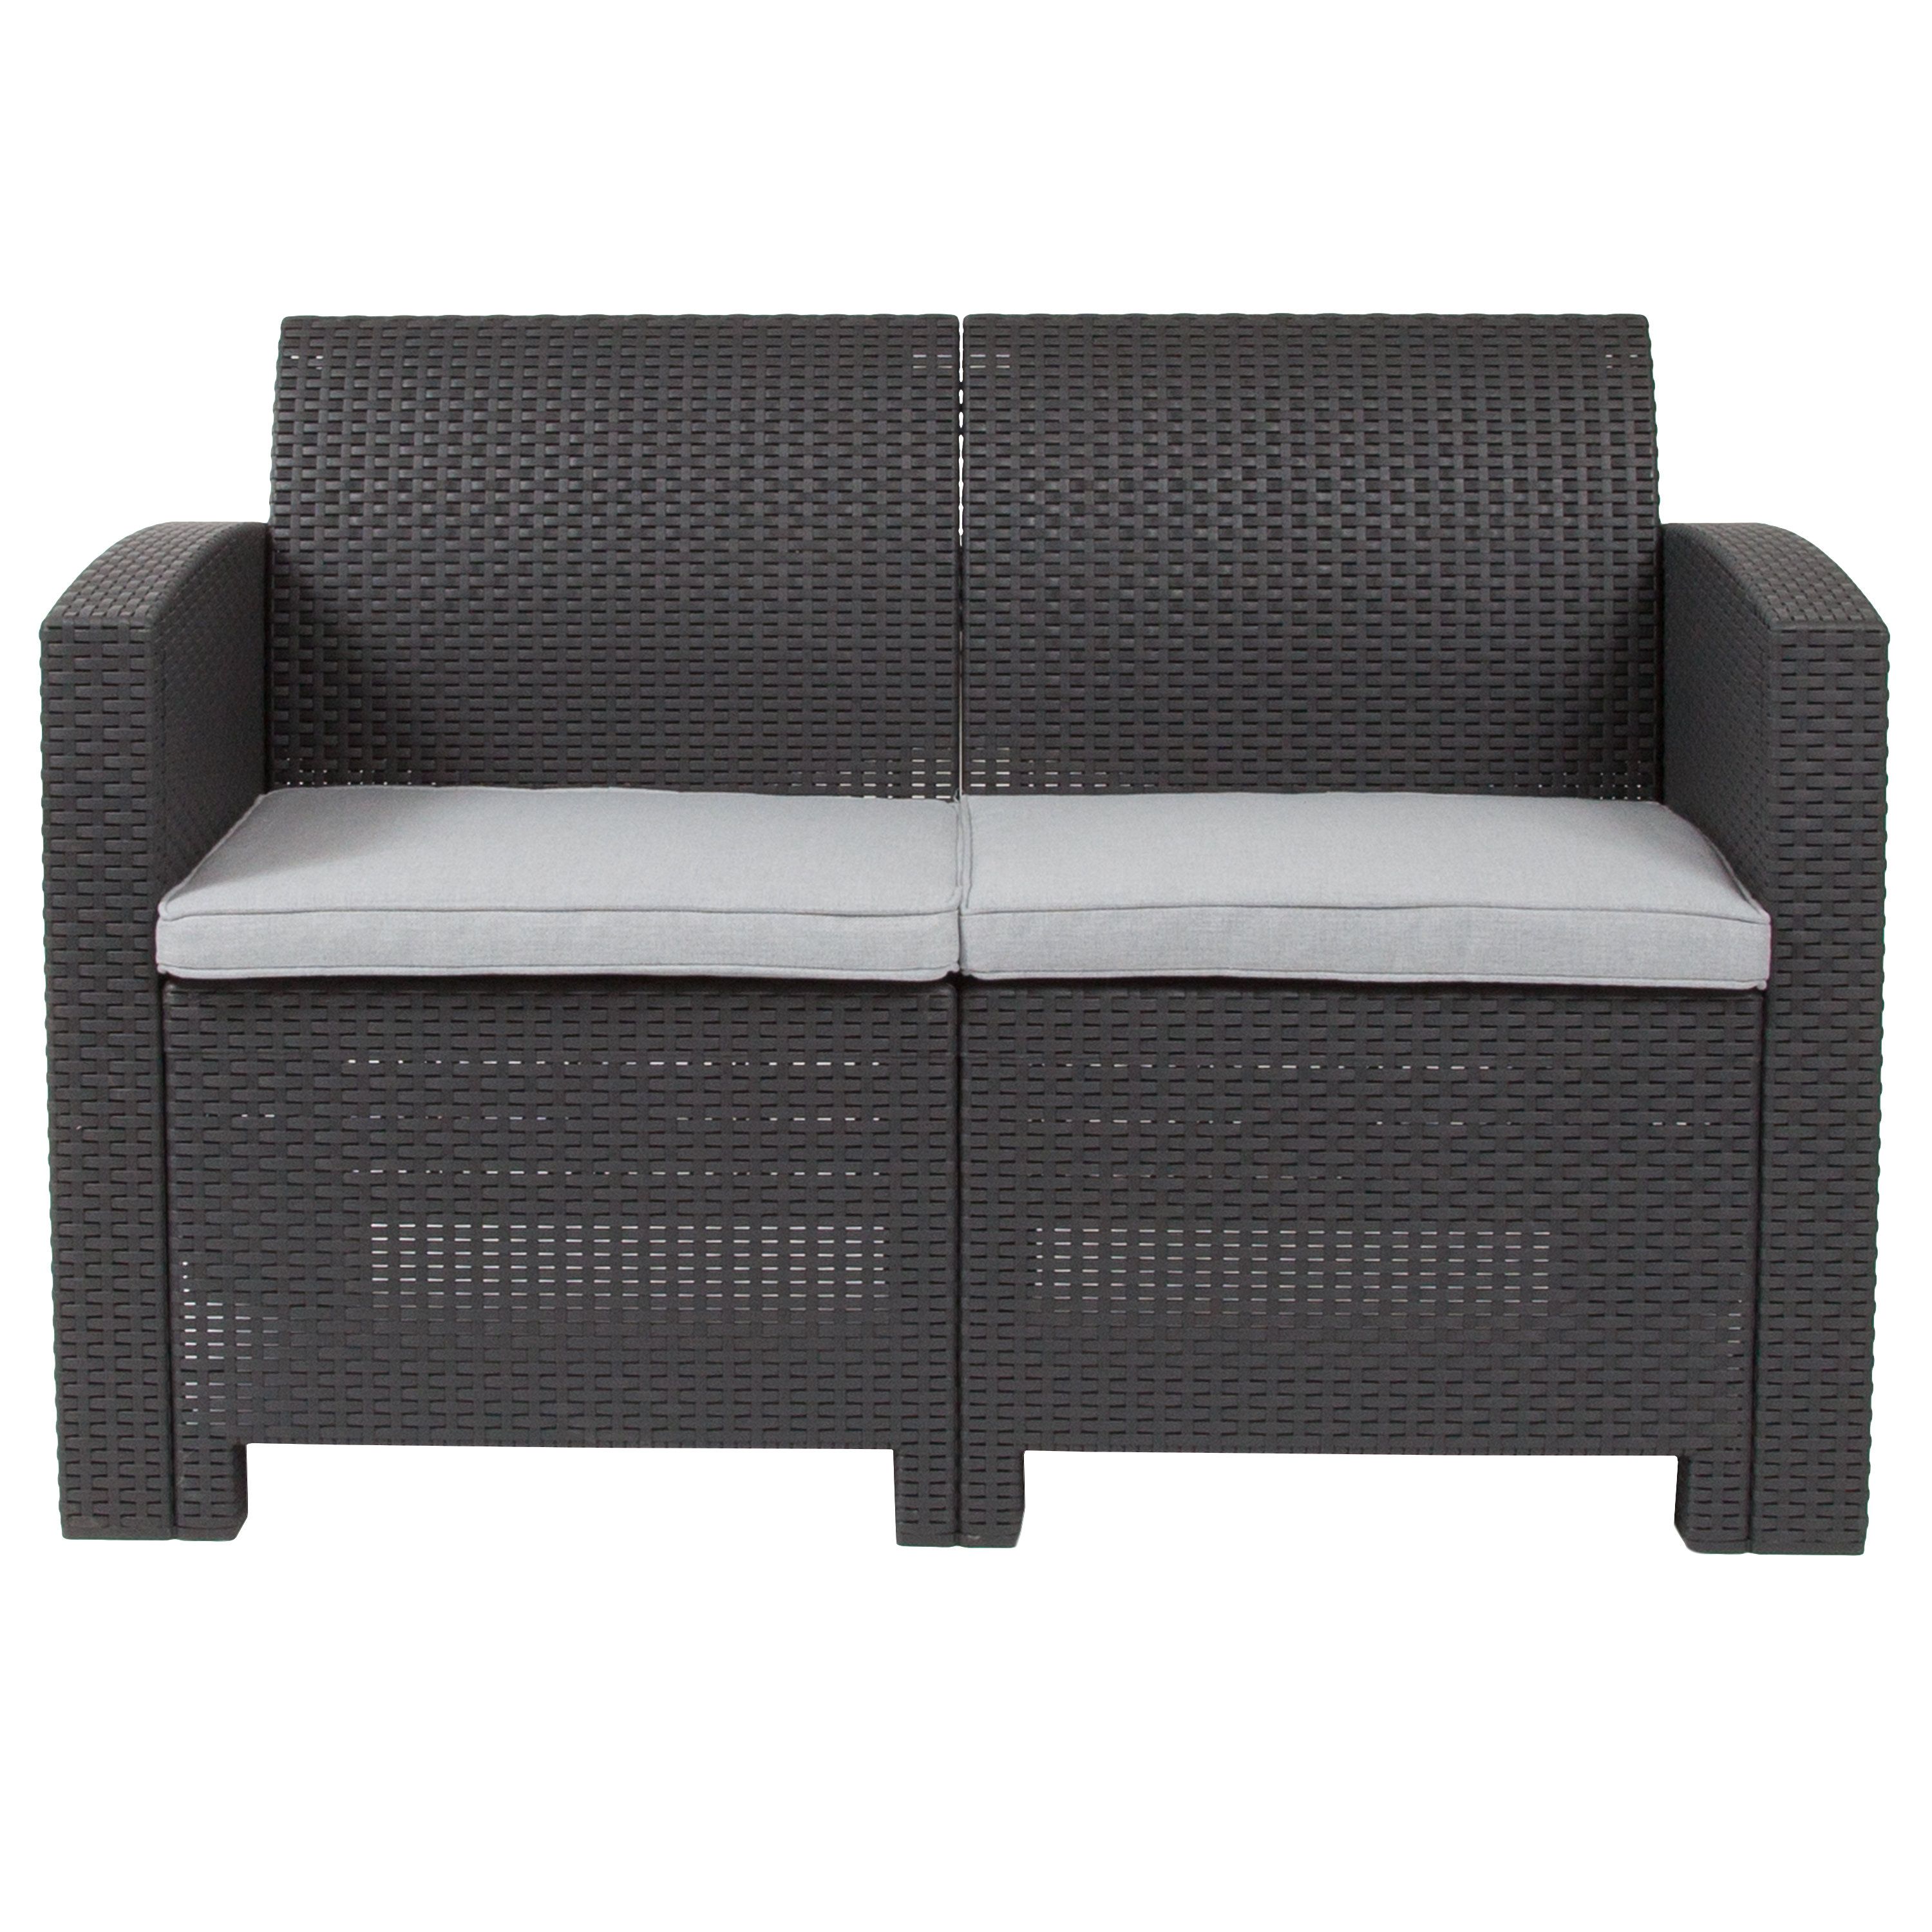 Stockwell Patio Sofas With Cushions Throughout Widely Used Stockwell Loveseat With Cushions (View 3 of 20)